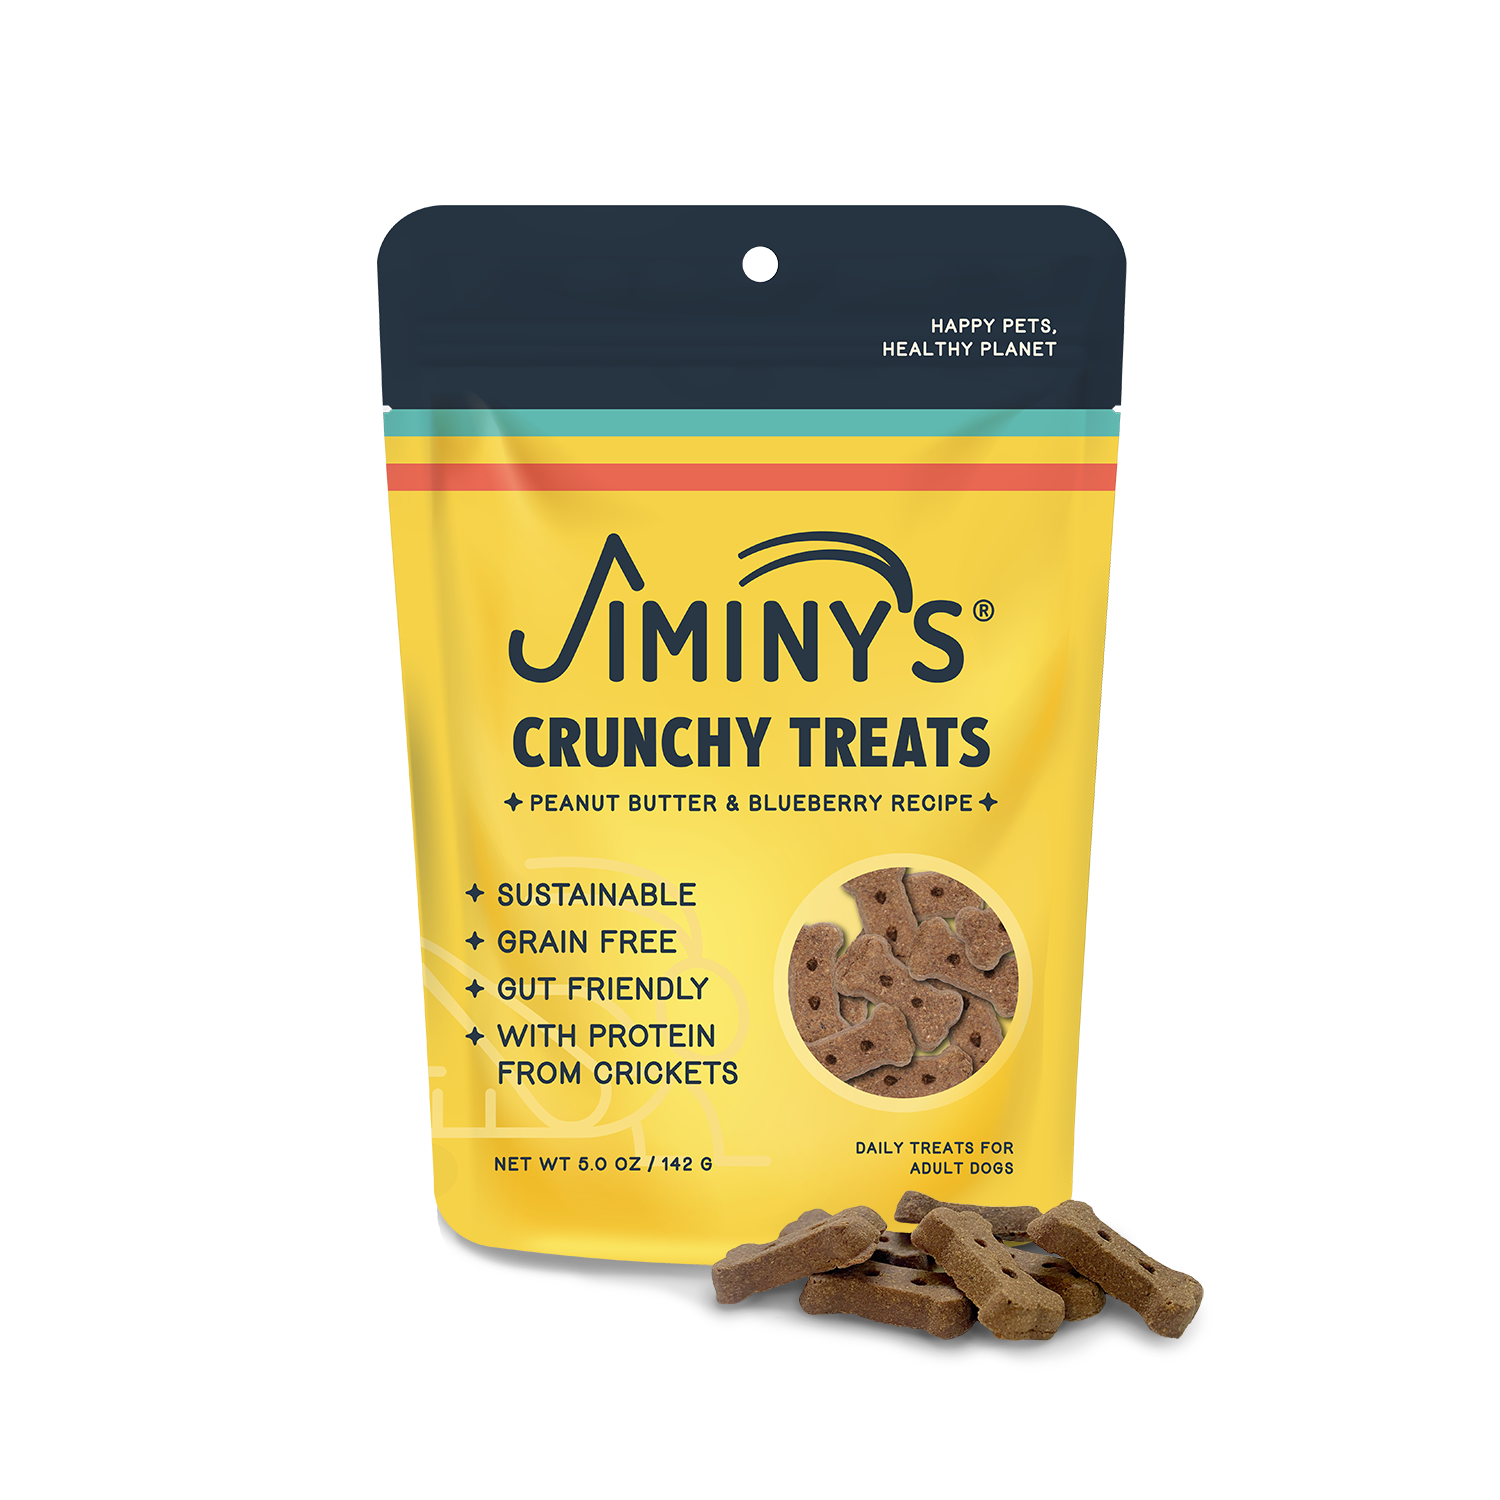 Jiminy's Peanut Butter and Blueberry Recipe Dog Treats - Soft-Baked Biscuits with Cricket Protein and Blueberries front bag